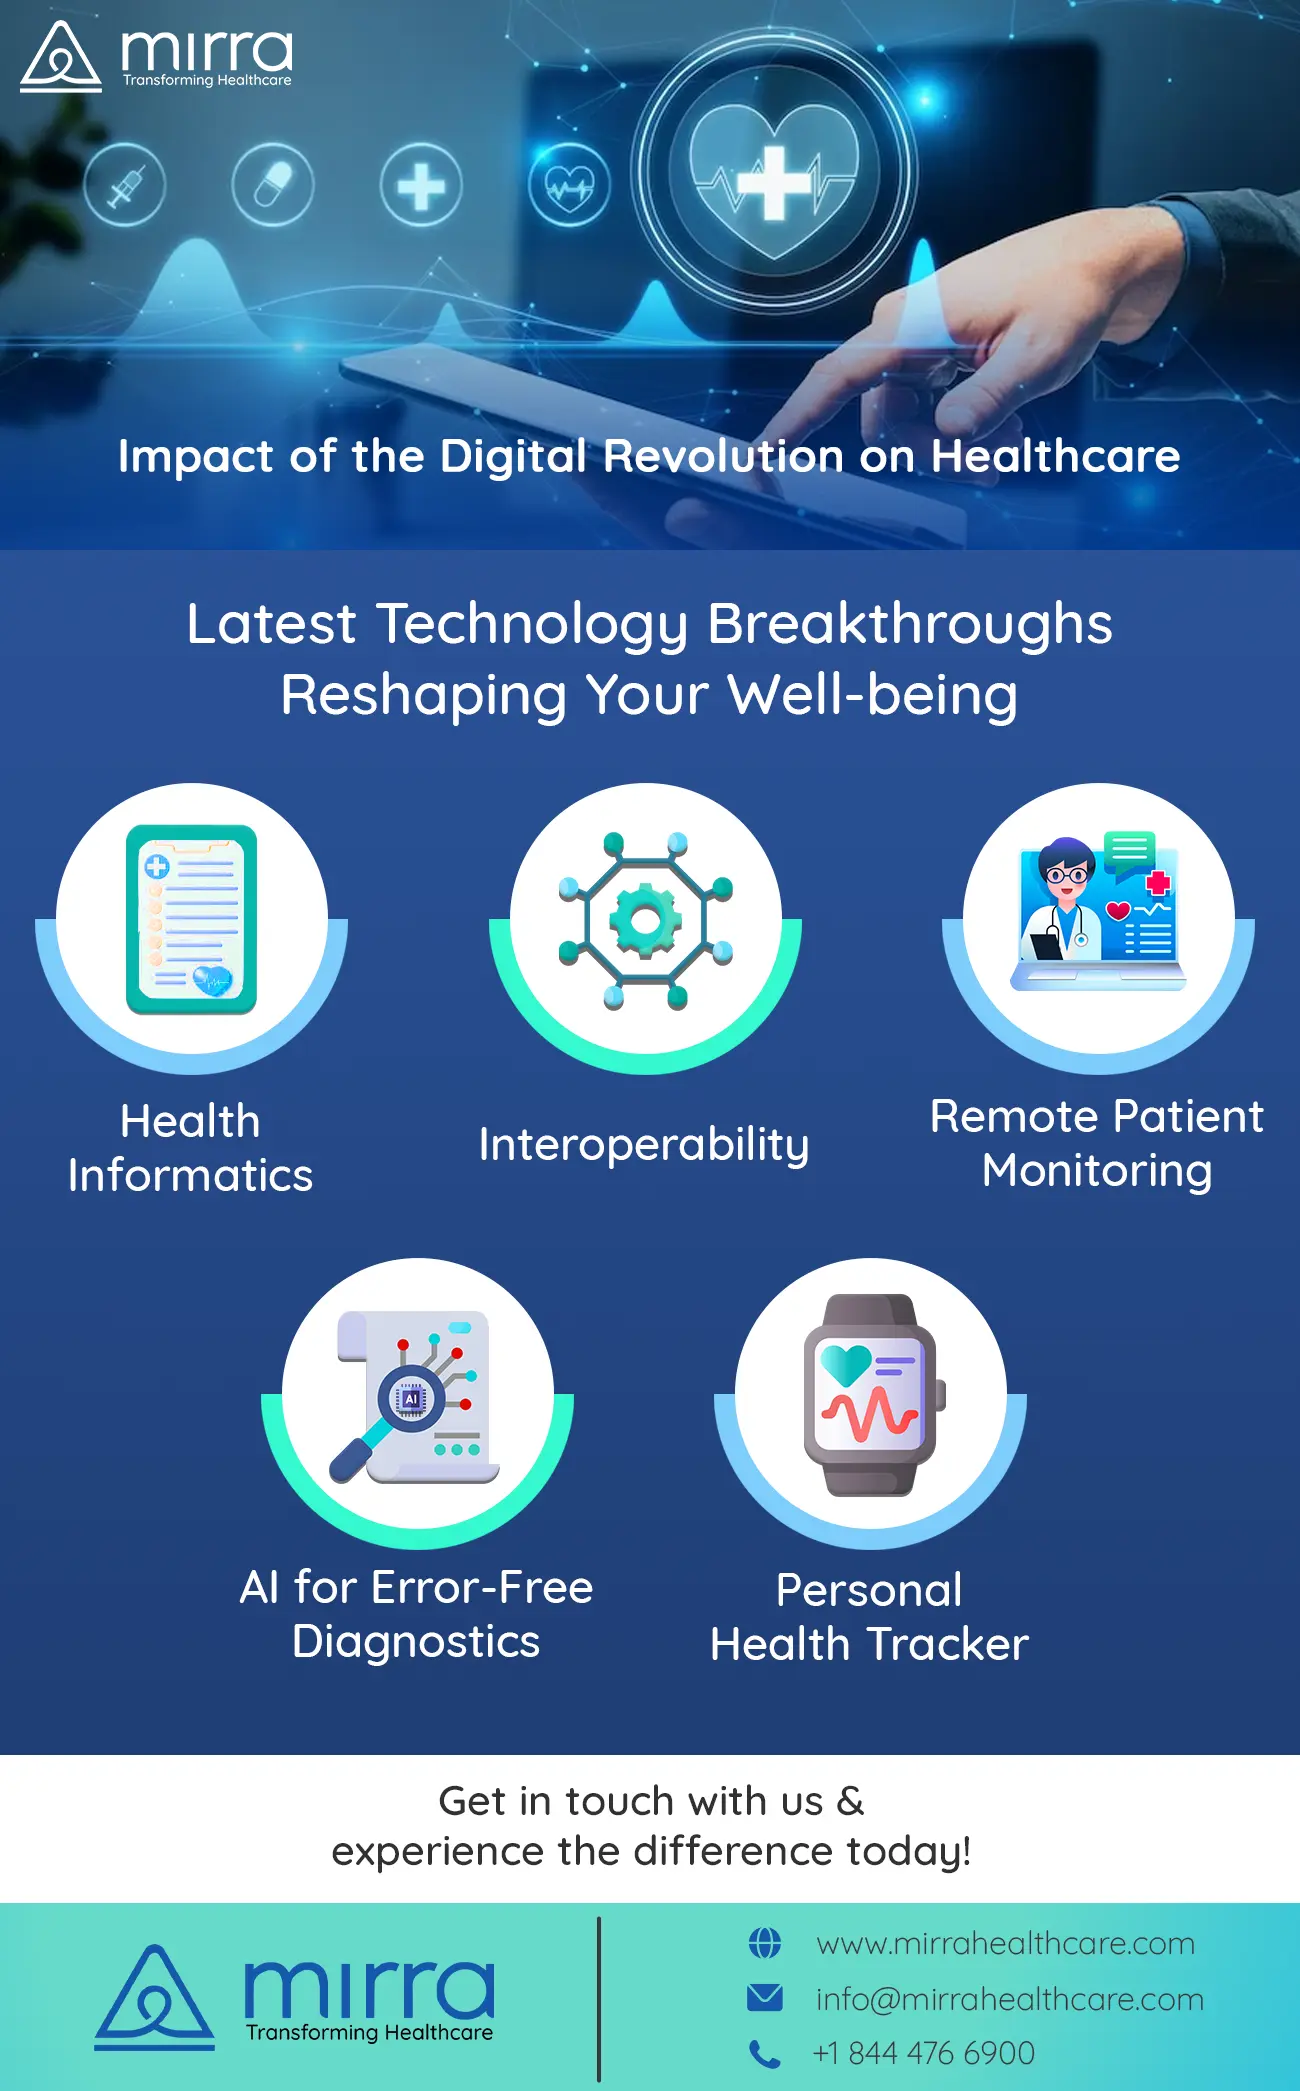 Positive effects of the digital revolution in healthcare